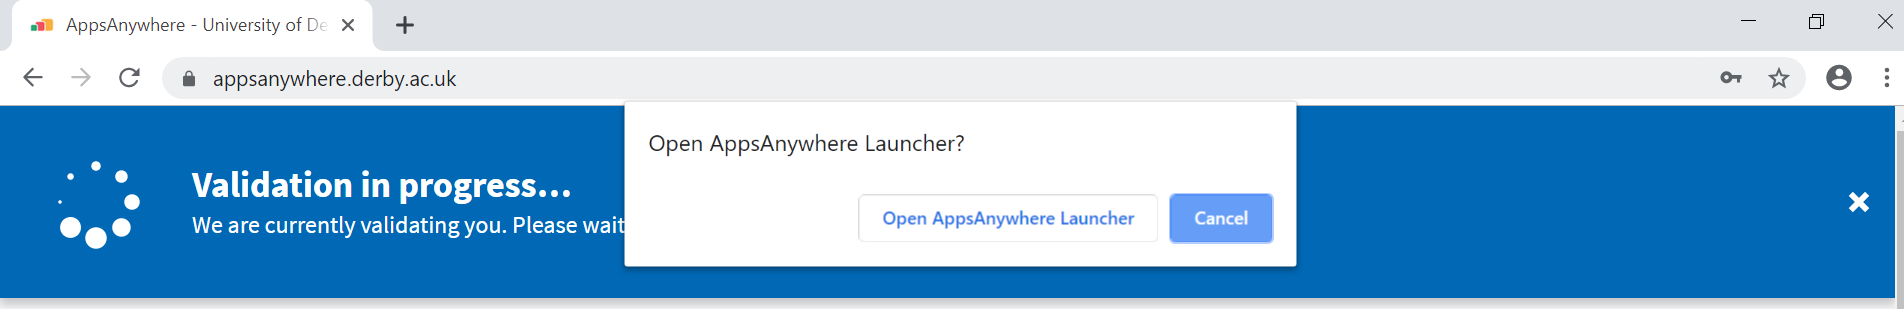 aa-launcher.png